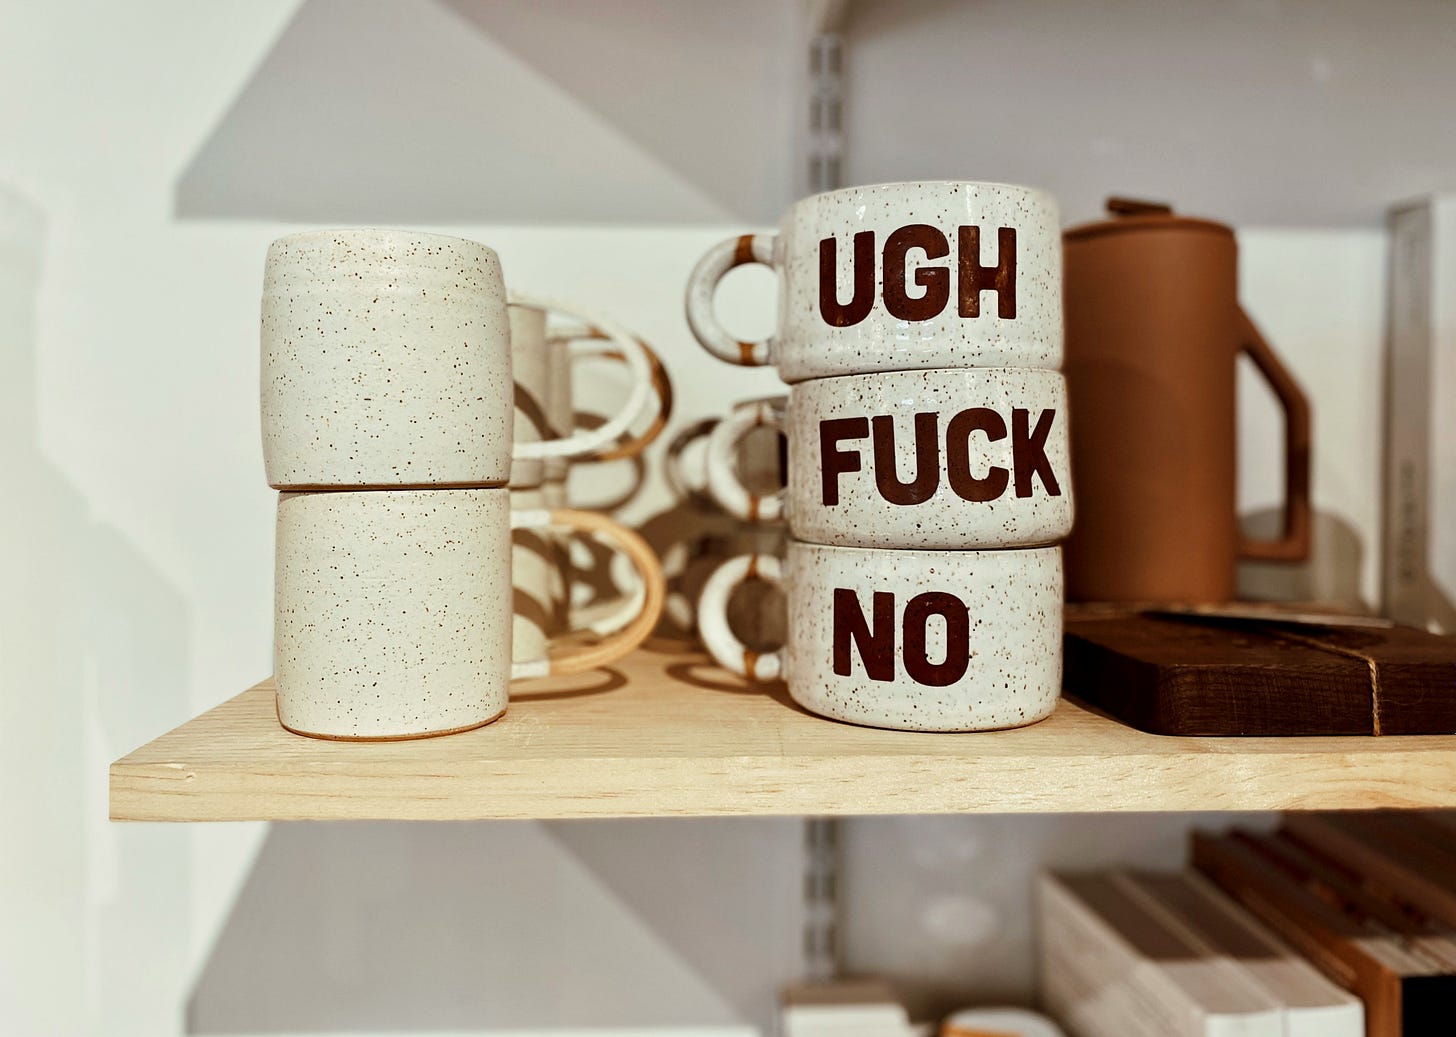 A photo of a wooden shelf against a white background. On the shelf are a stack of white mugs. Three of them have words on them that say: ugh, fuck, no